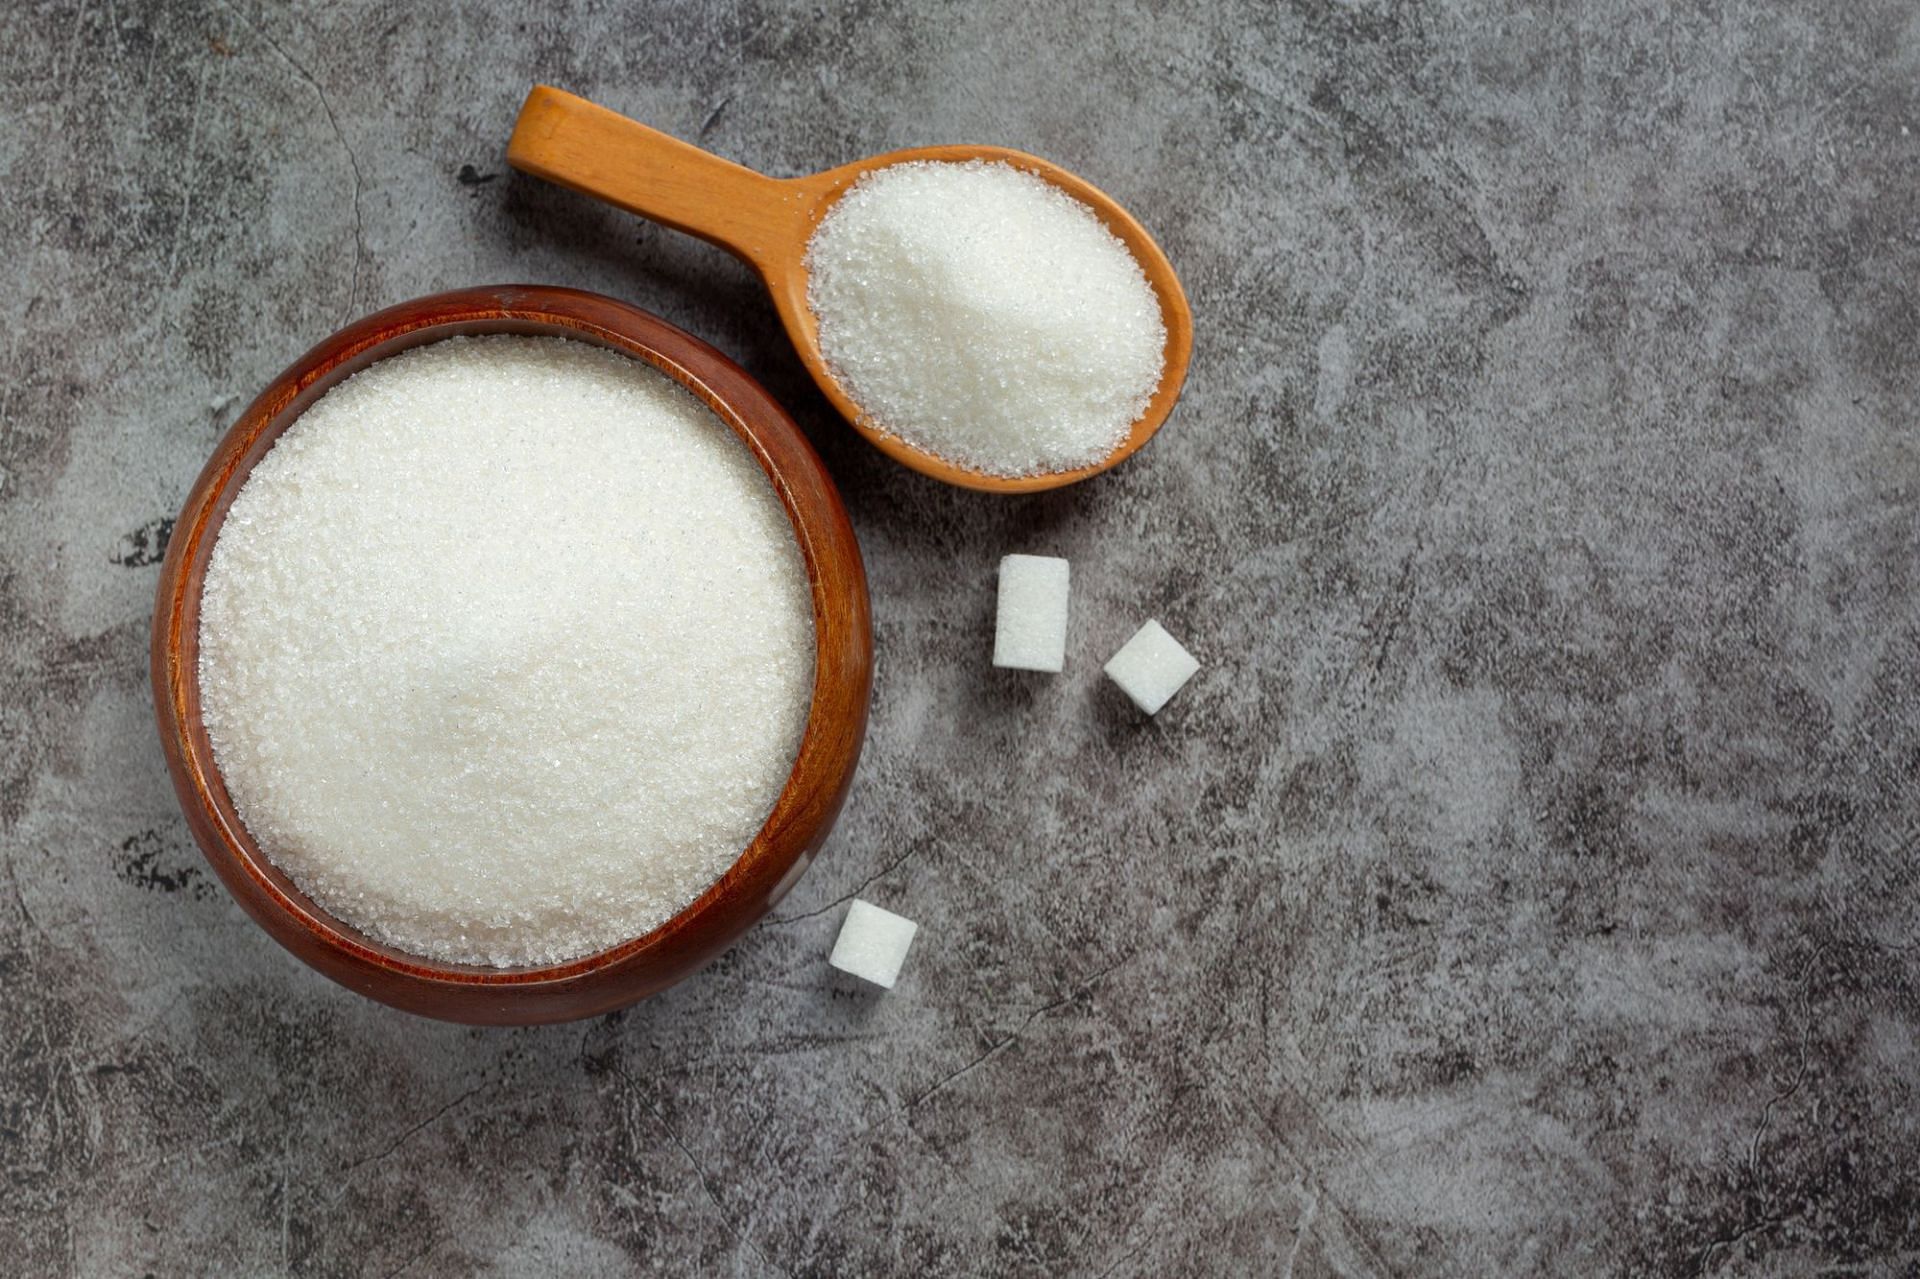 Is it safe to drink baking soda for weight loss? (Image via Freepik)